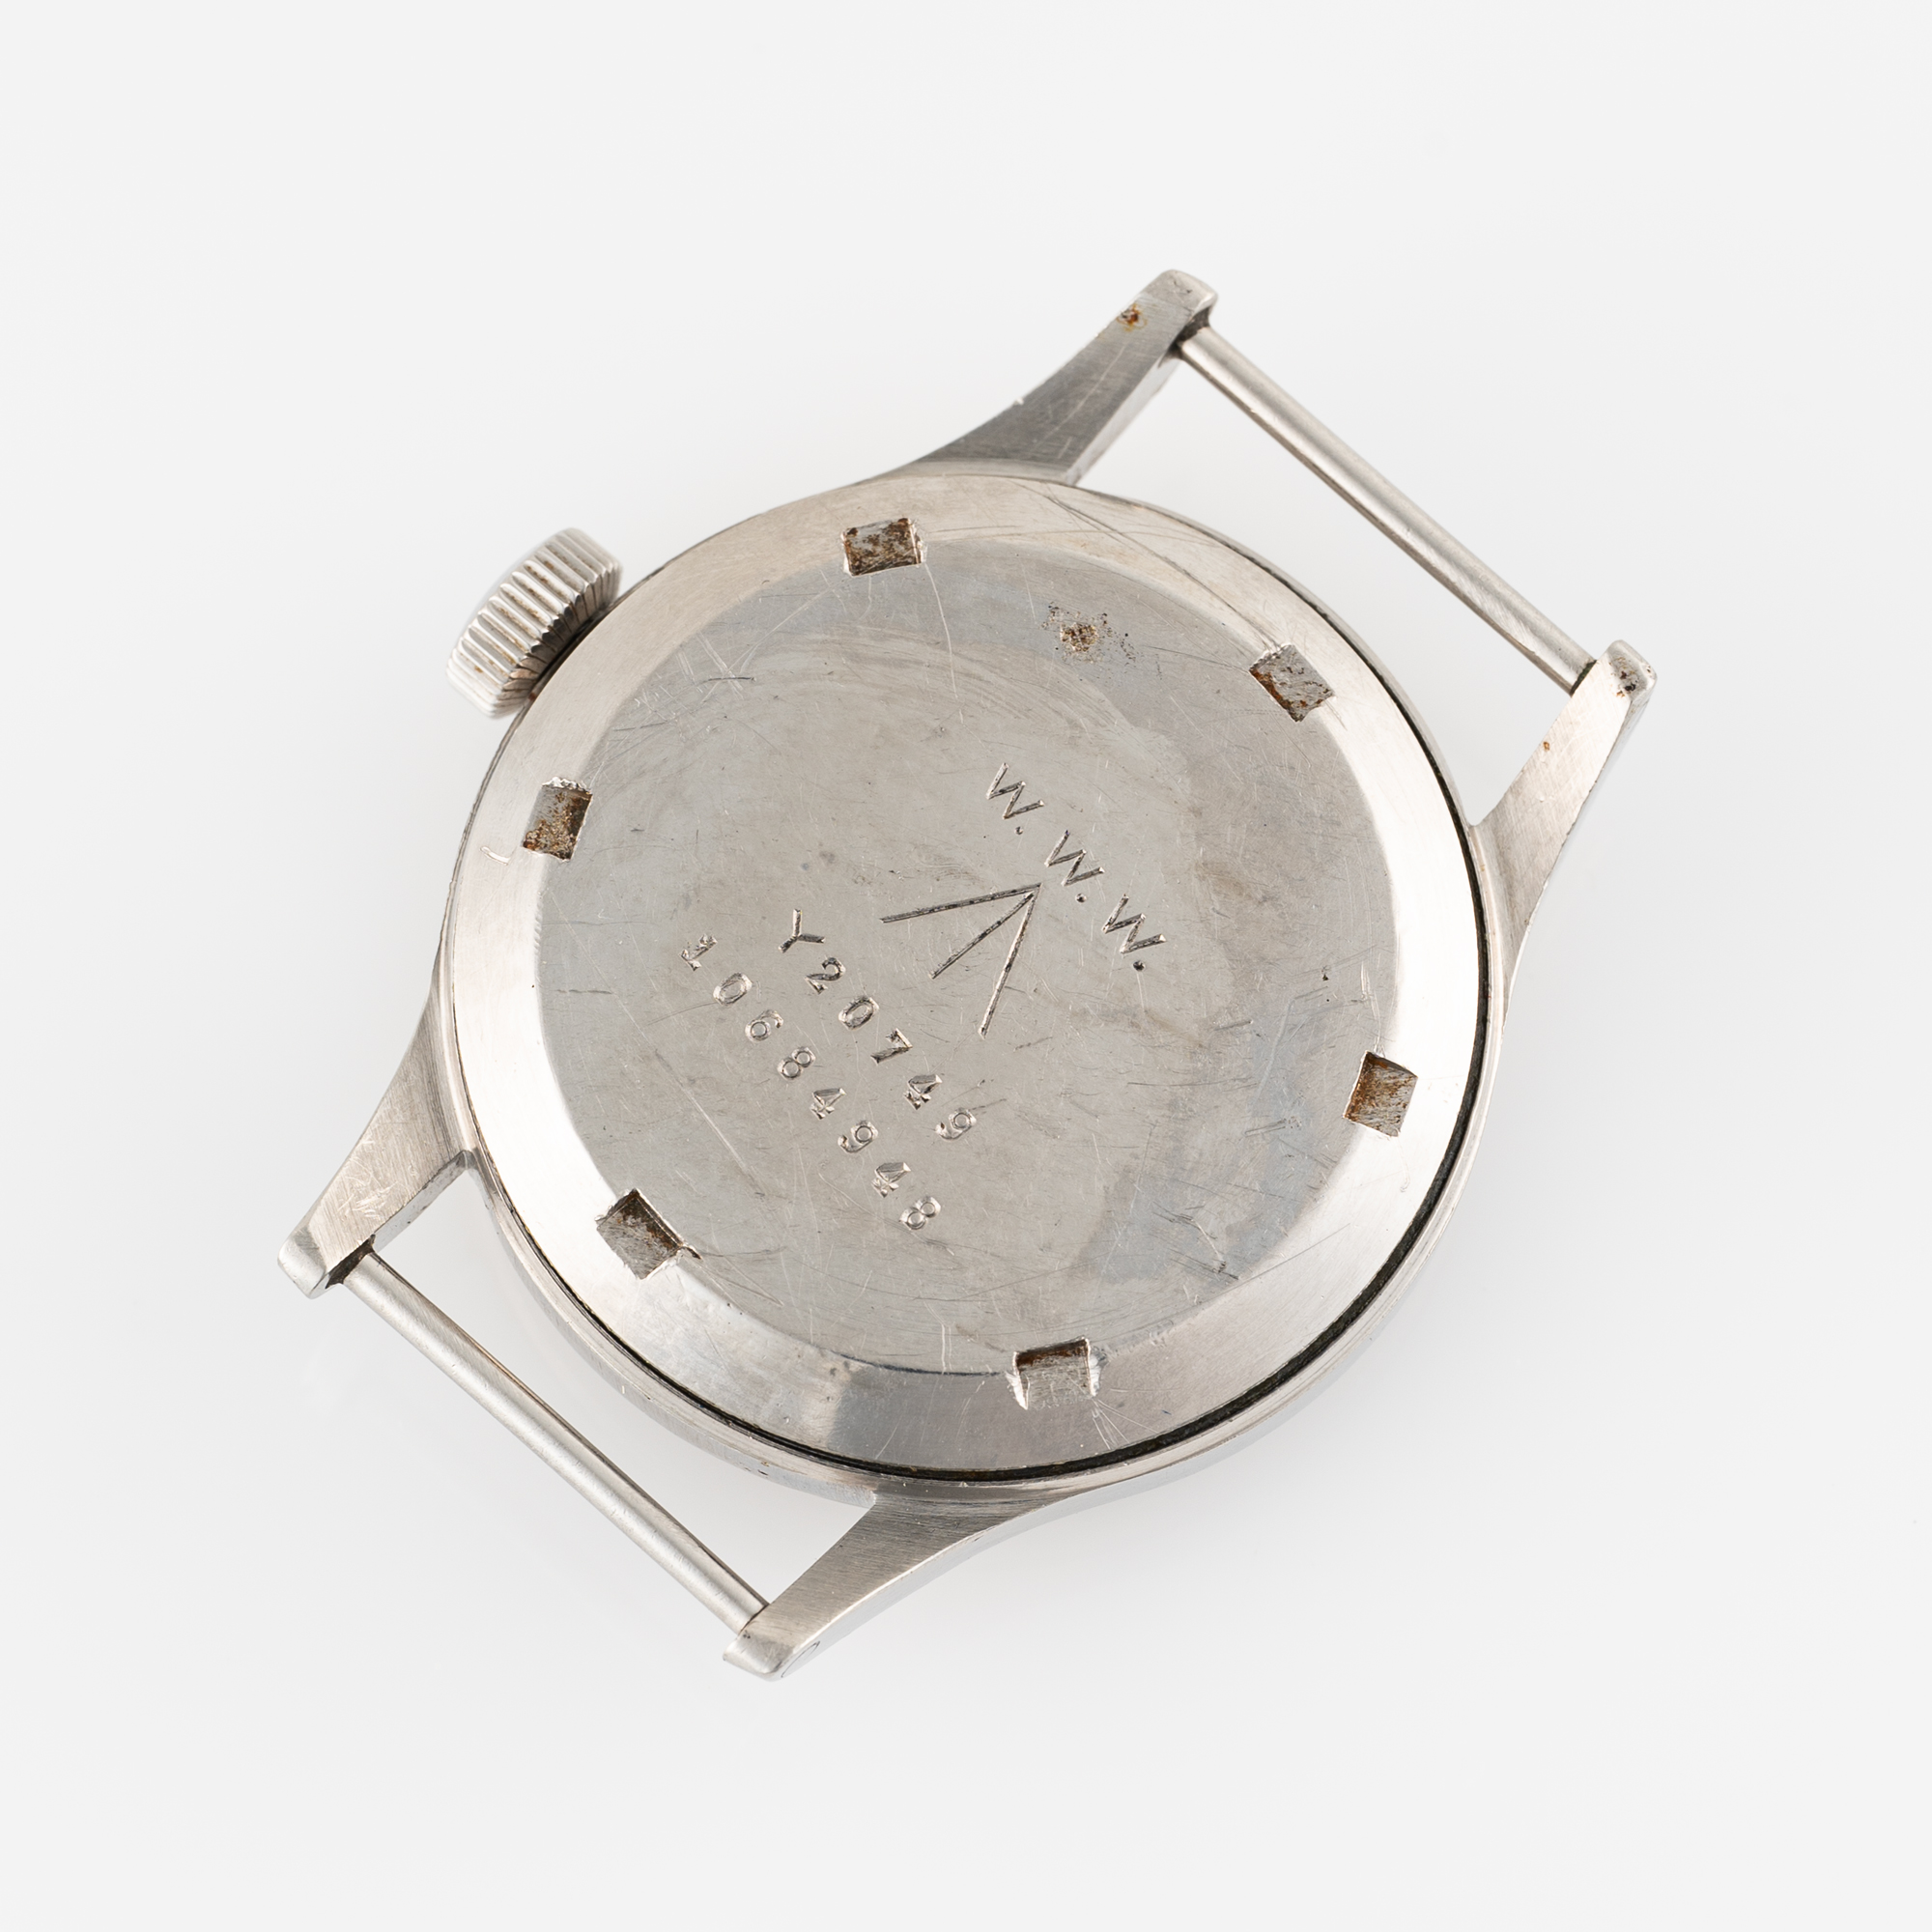 A GENTLEMAN'S STAINLESS STEEL BRITISH MILITARY OMEGA W.W.W. WRIST WATCH CIRCA 1945, PART OF THE " - Image 7 of 8